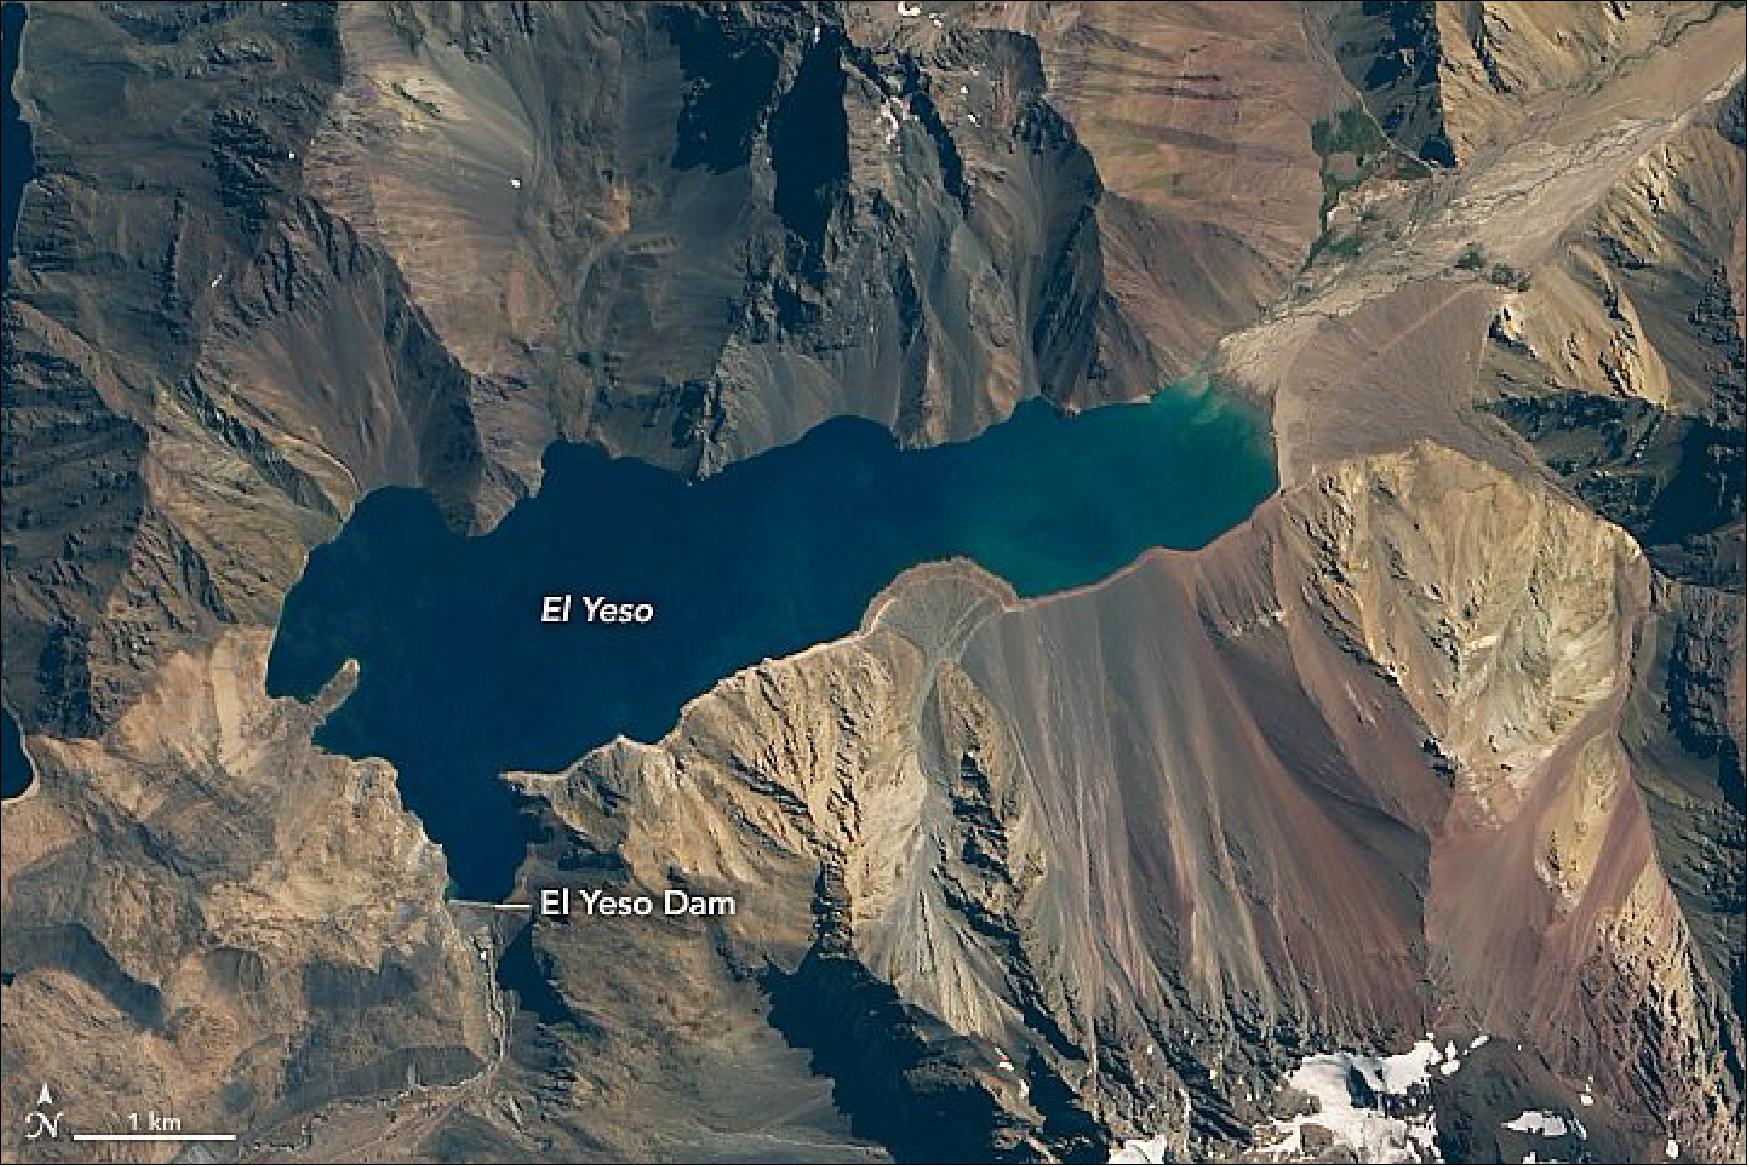 Figure 101: Image of the El Yeso reservoir as acquired by OLI on Landsat-8 on 19 March 2016 (image credit: NASA Earth Observatory)